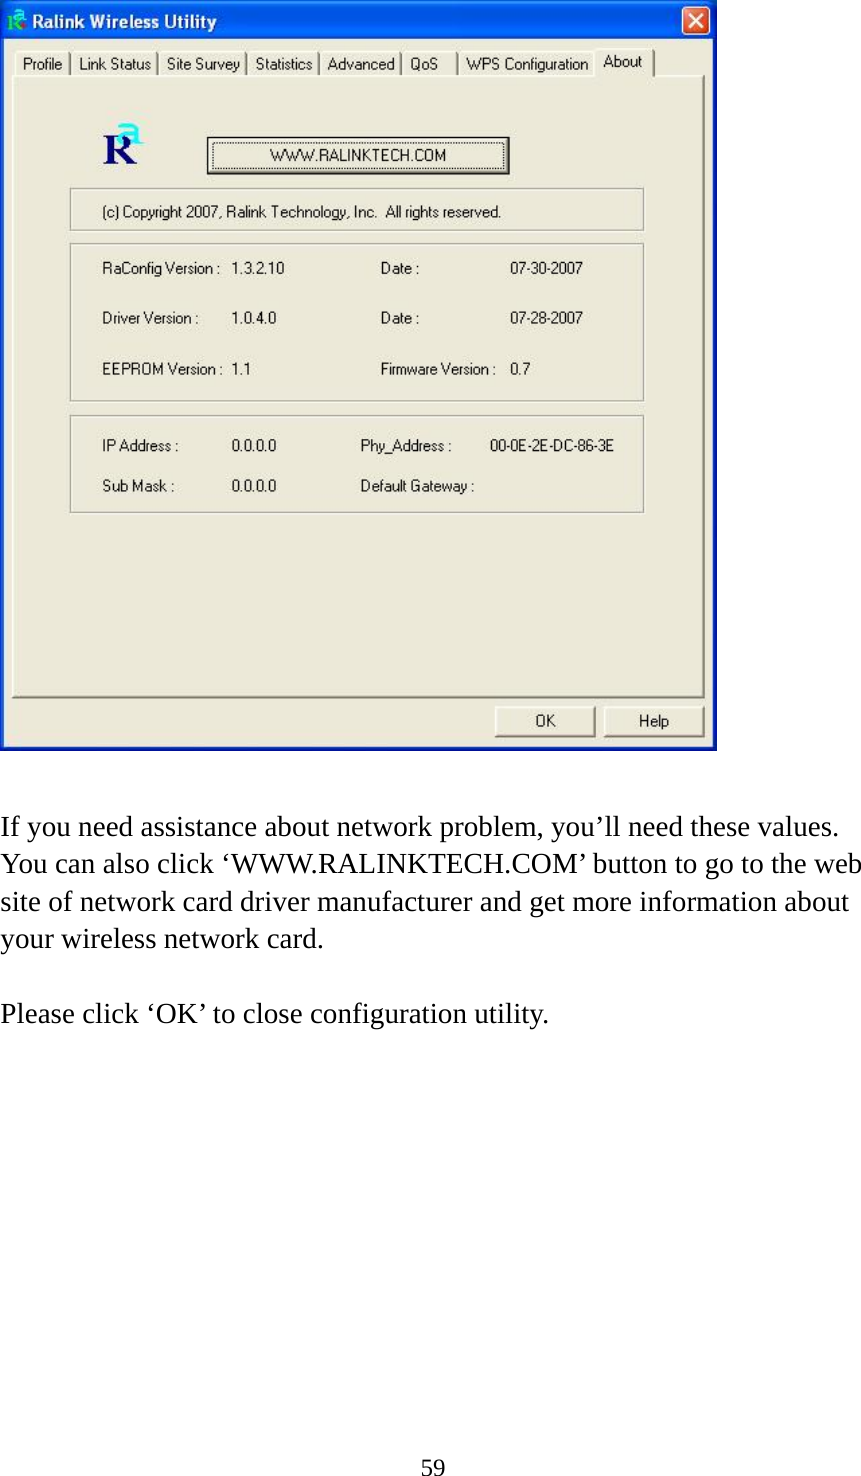  59   If you need assistance about network problem, you’ll need these values. You can also click ‘WWW.RALINKTECH.COM’ button to go to the web site of network card driver manufacturer and get more information about your wireless network card.  Please click ‘OK’ to close configuration utility. 